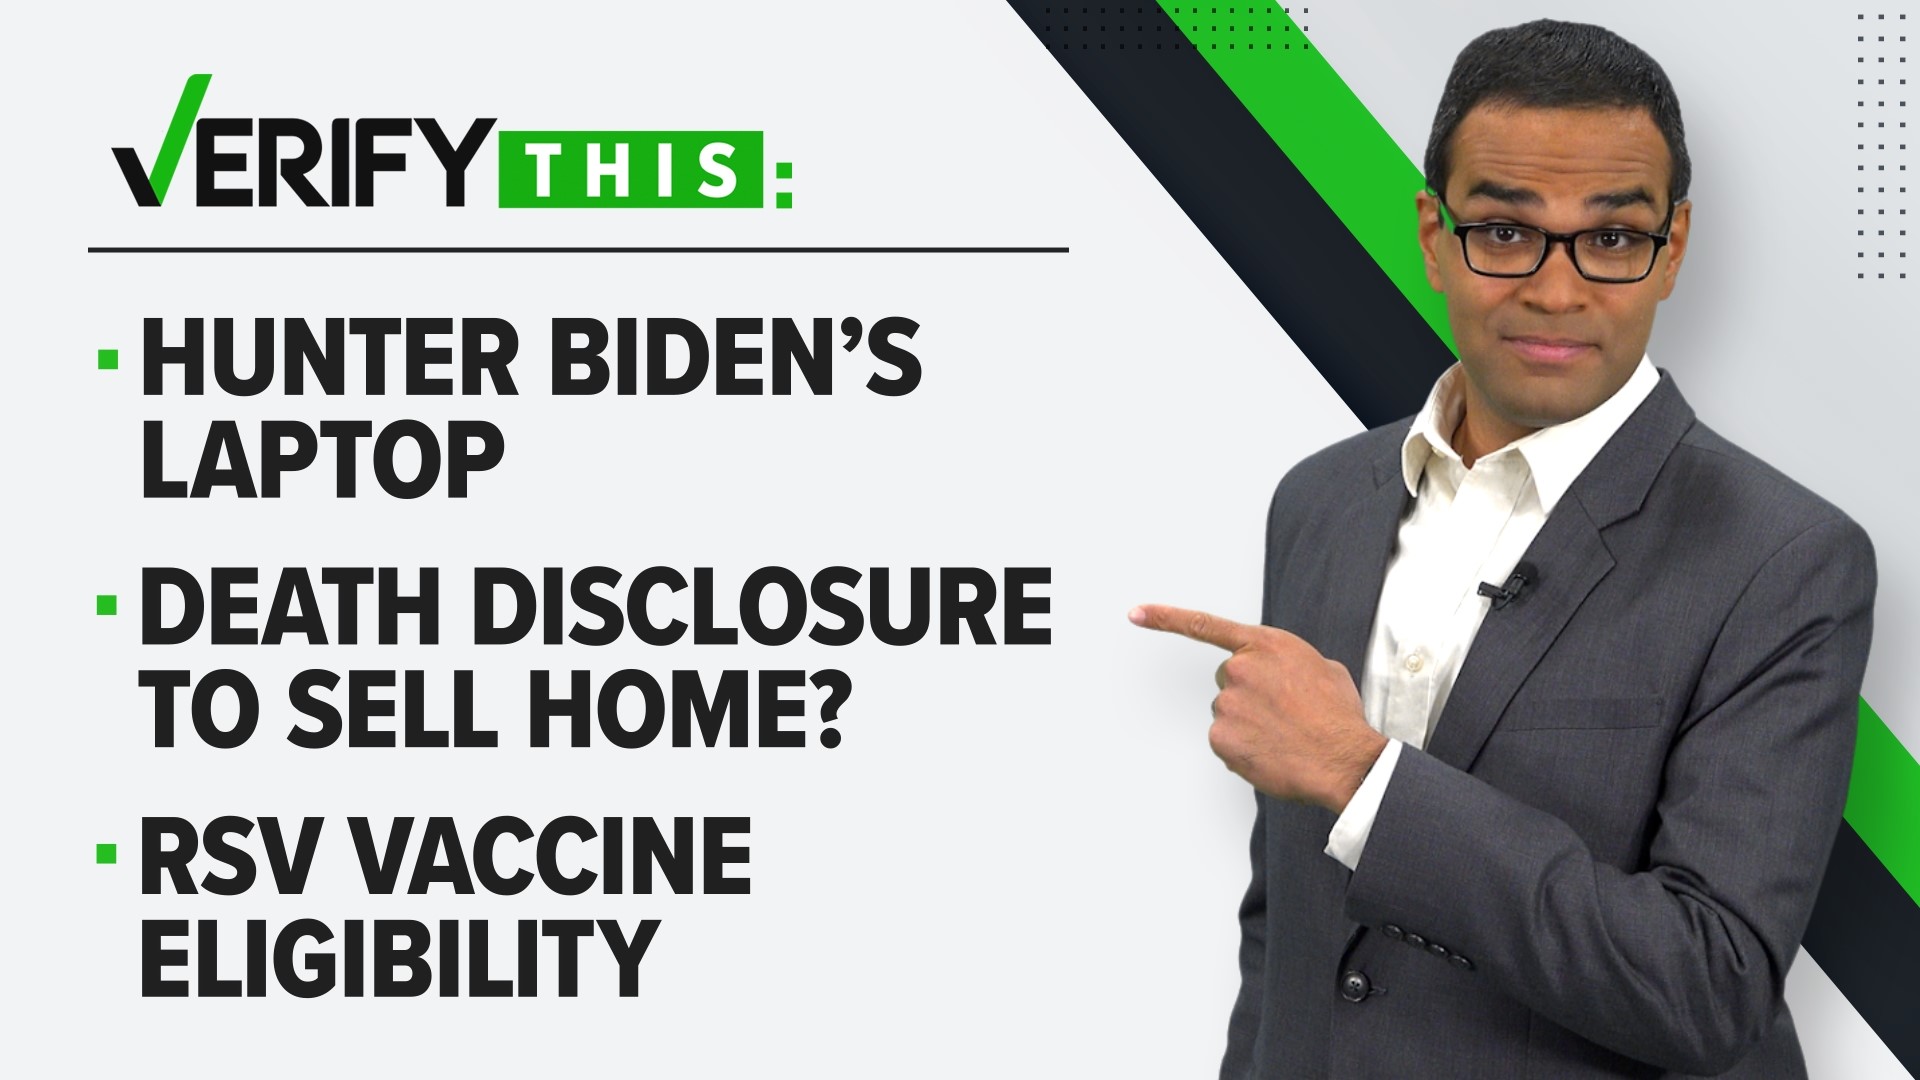 In this episode we answer questions about the investigation surrounding Hunter Biden's laptop, if you need a prescription to get the RSV vaccine and lots more